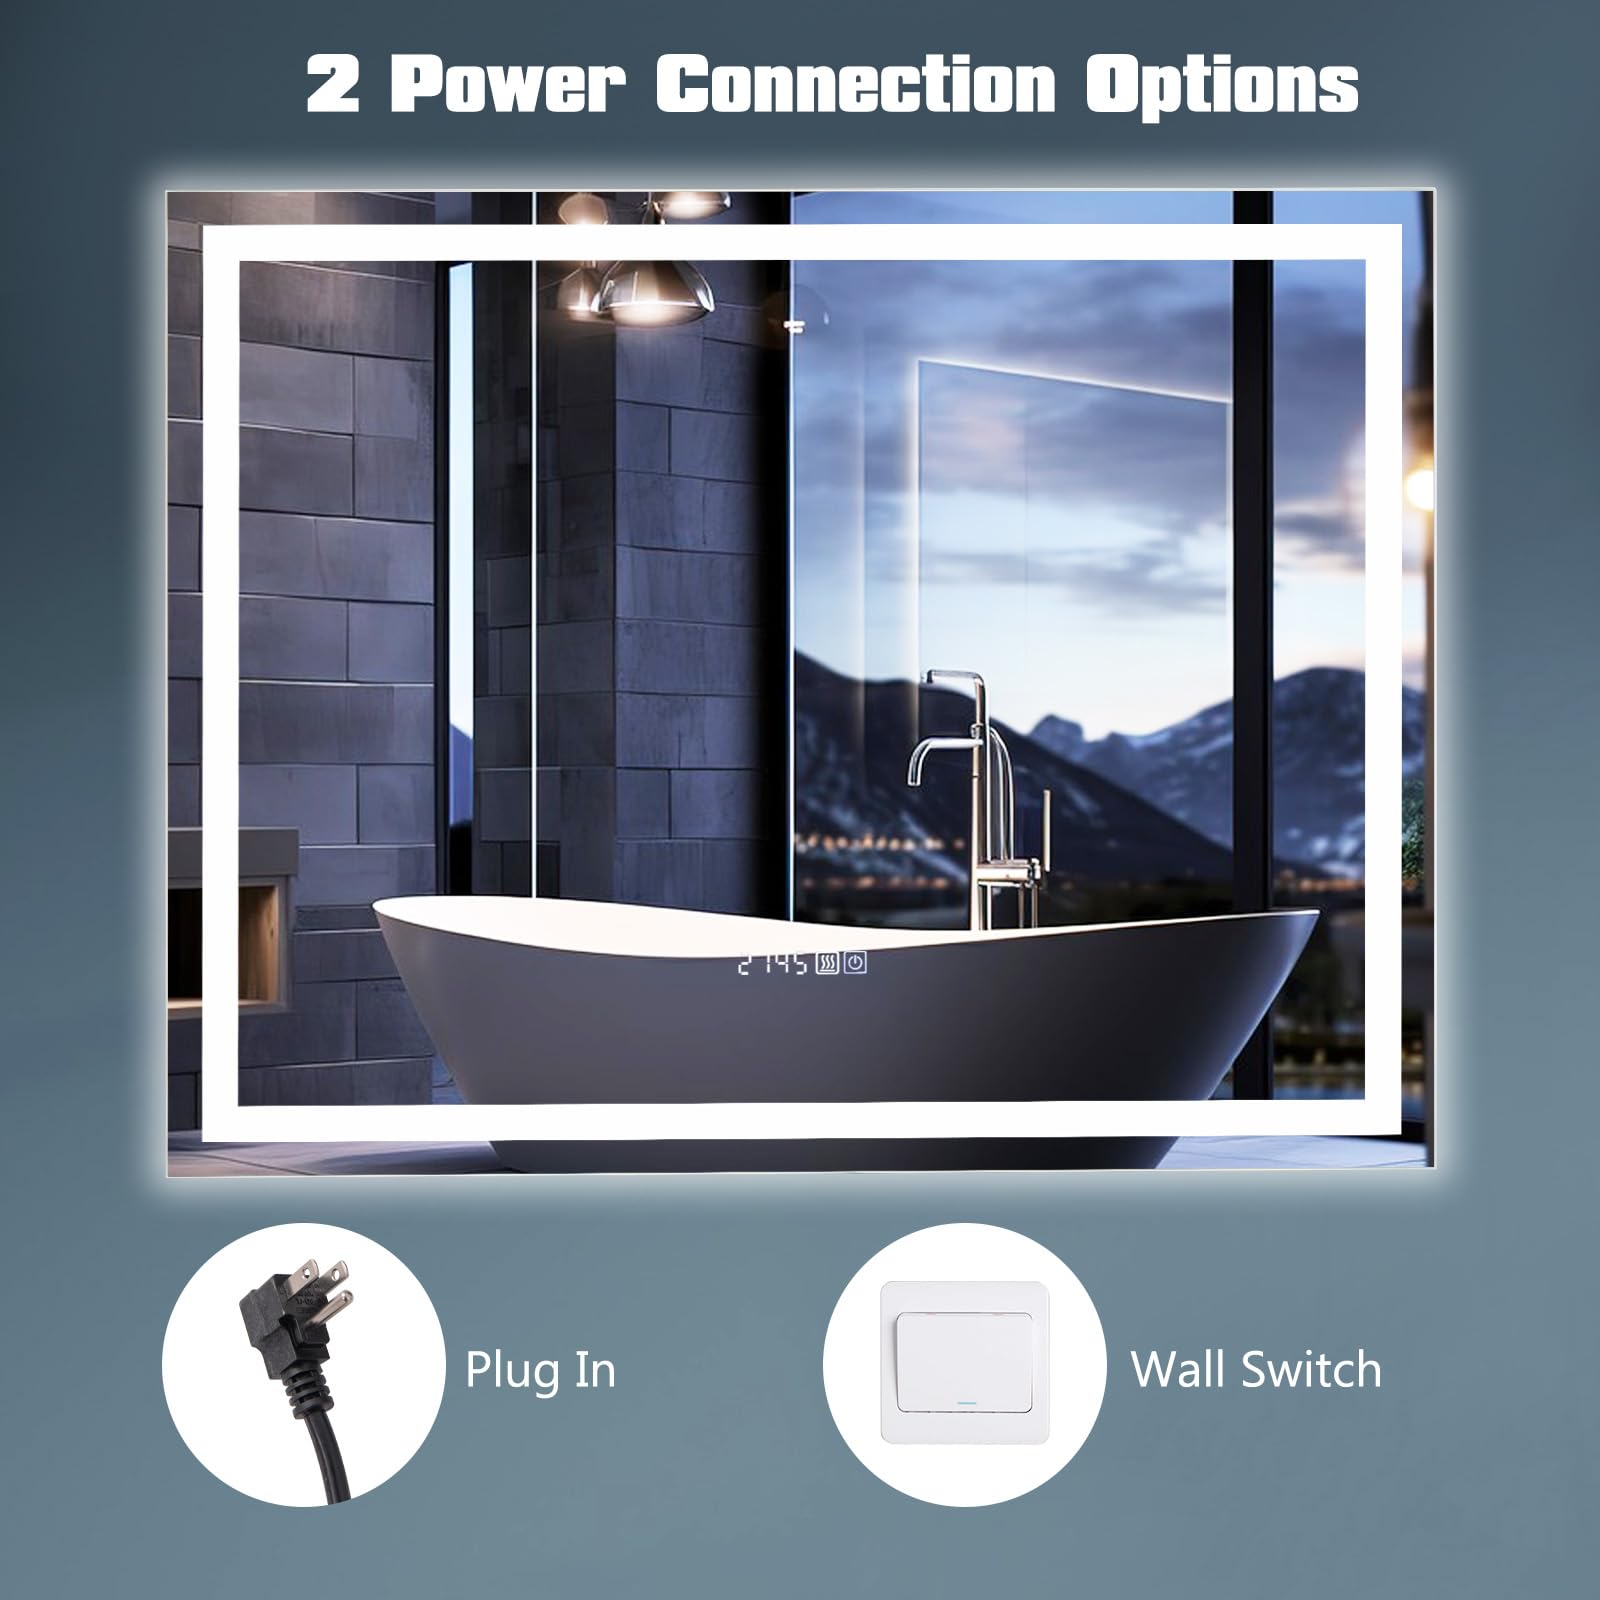 CHARMAID LED Bathroom Mirror - 36" x 28" Lighted Vanity Mirror with Front and Backlight